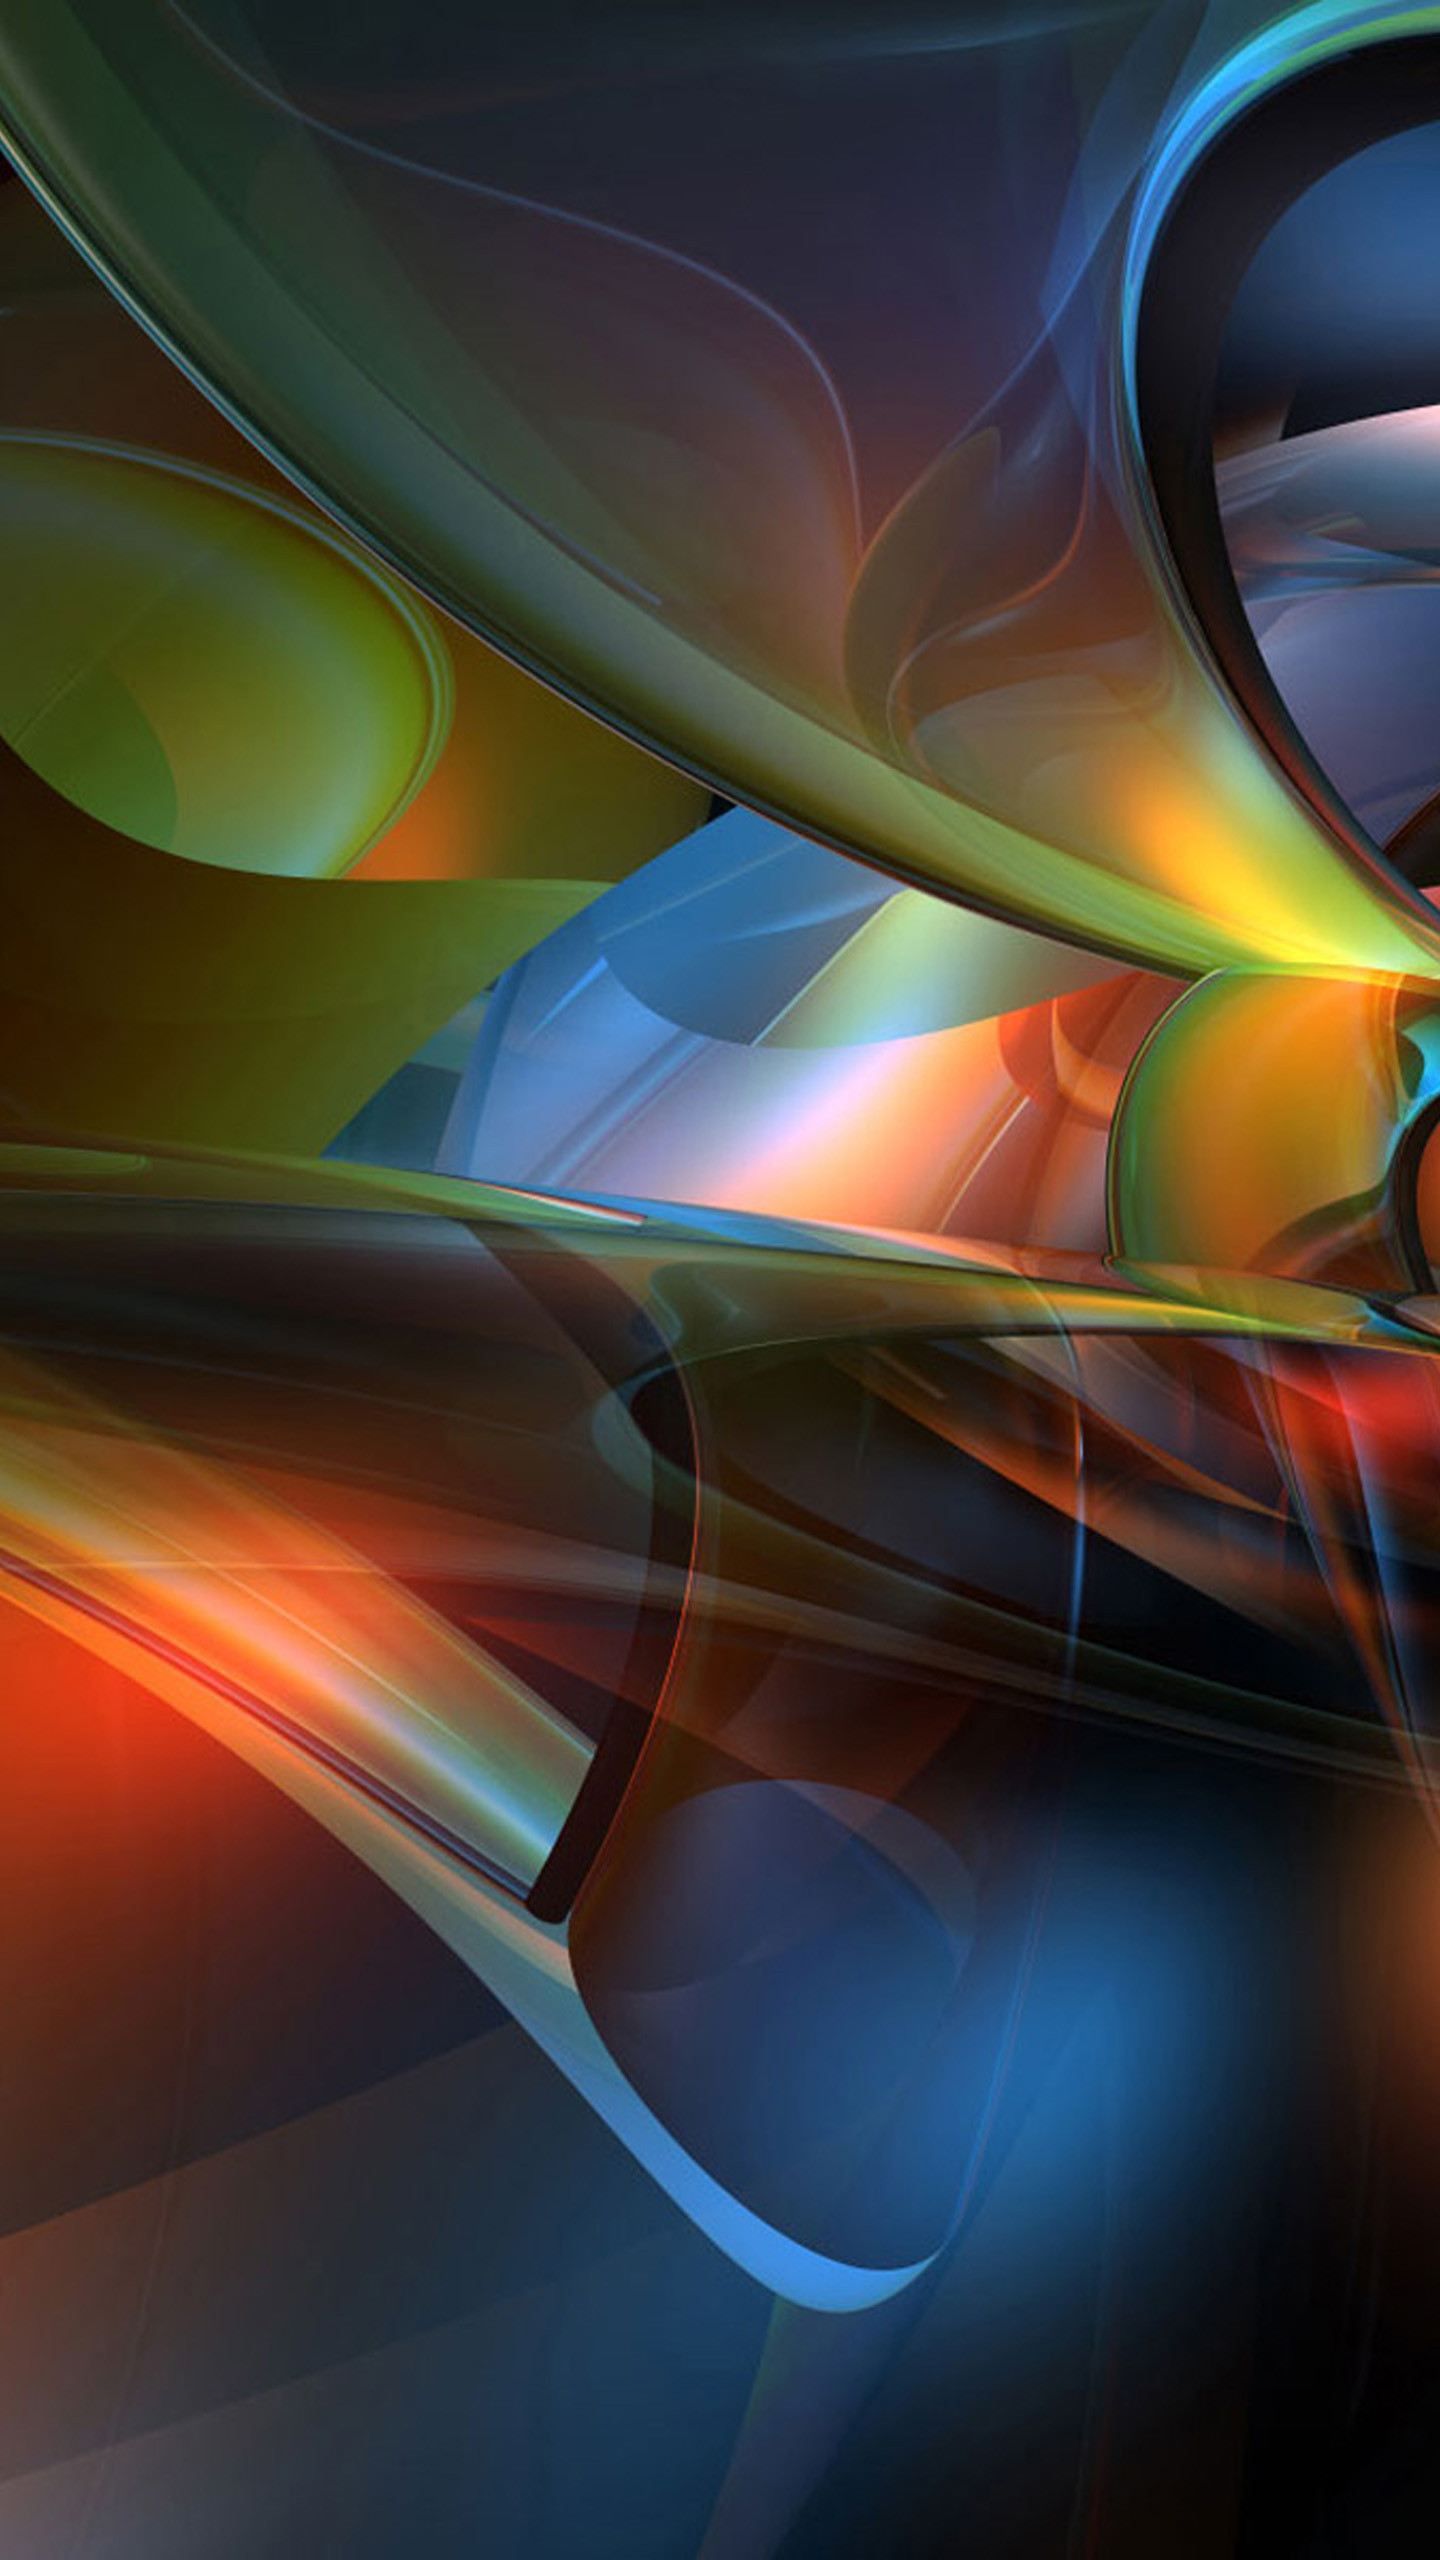 1440x2560 3d Wallpaper for Phone Free New 3d Abstract Mobile Phone Wallpaper Picture  Image